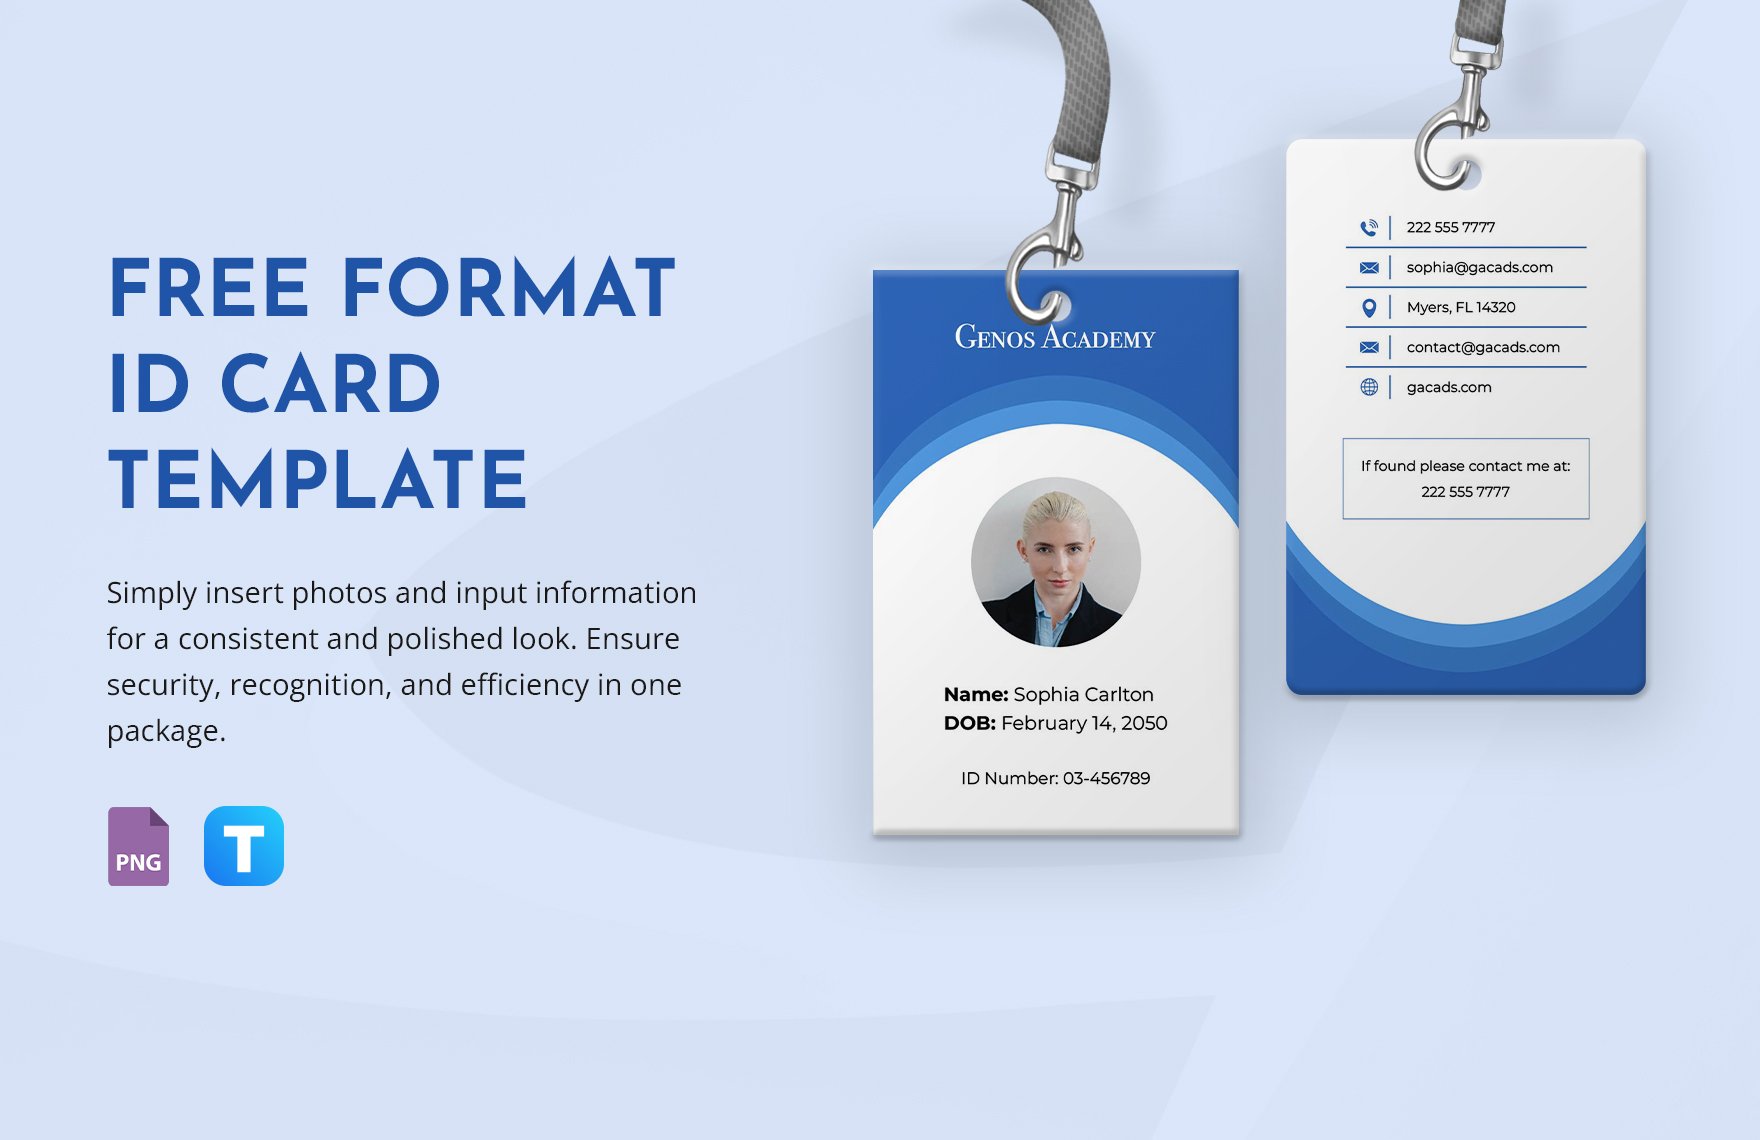 Format ID Card Template in PNG